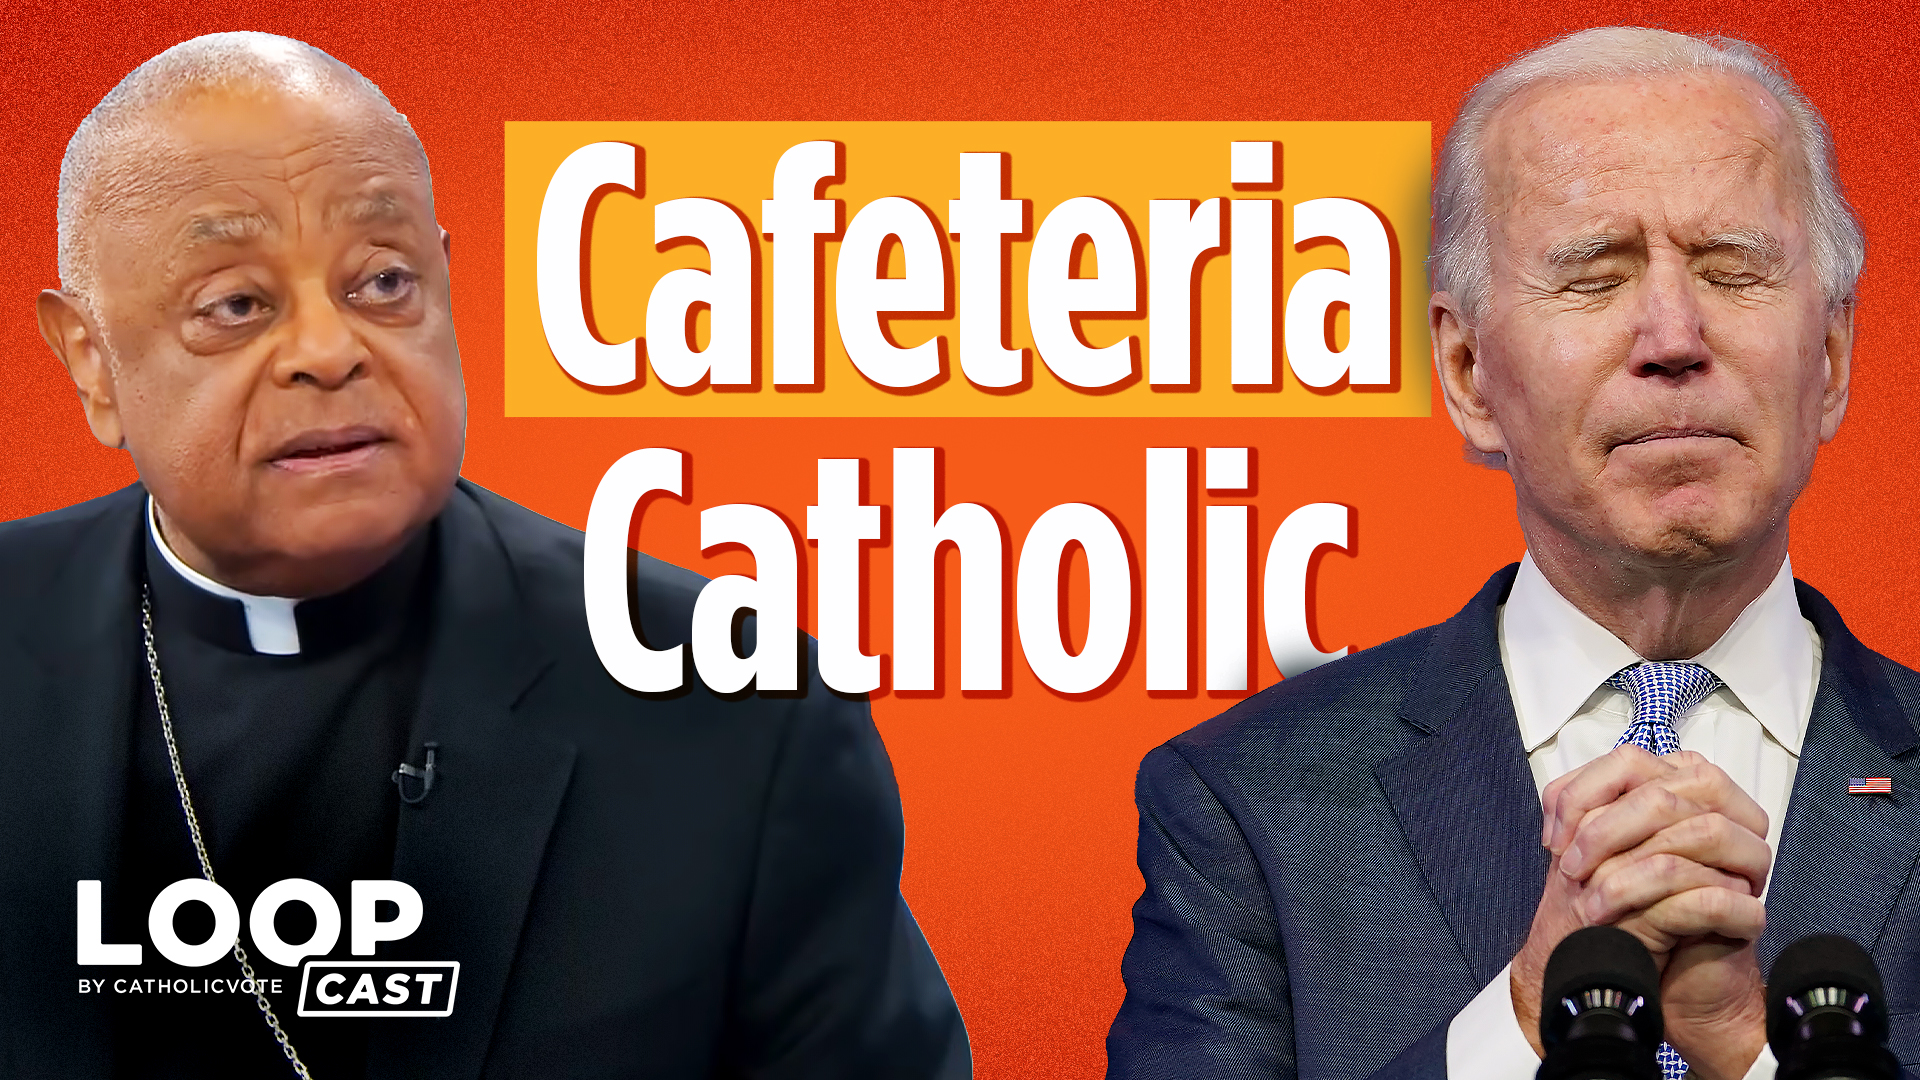 Cafeteria Catholics, Tammy Peterson Enters the Church, and Christian Visibility Day